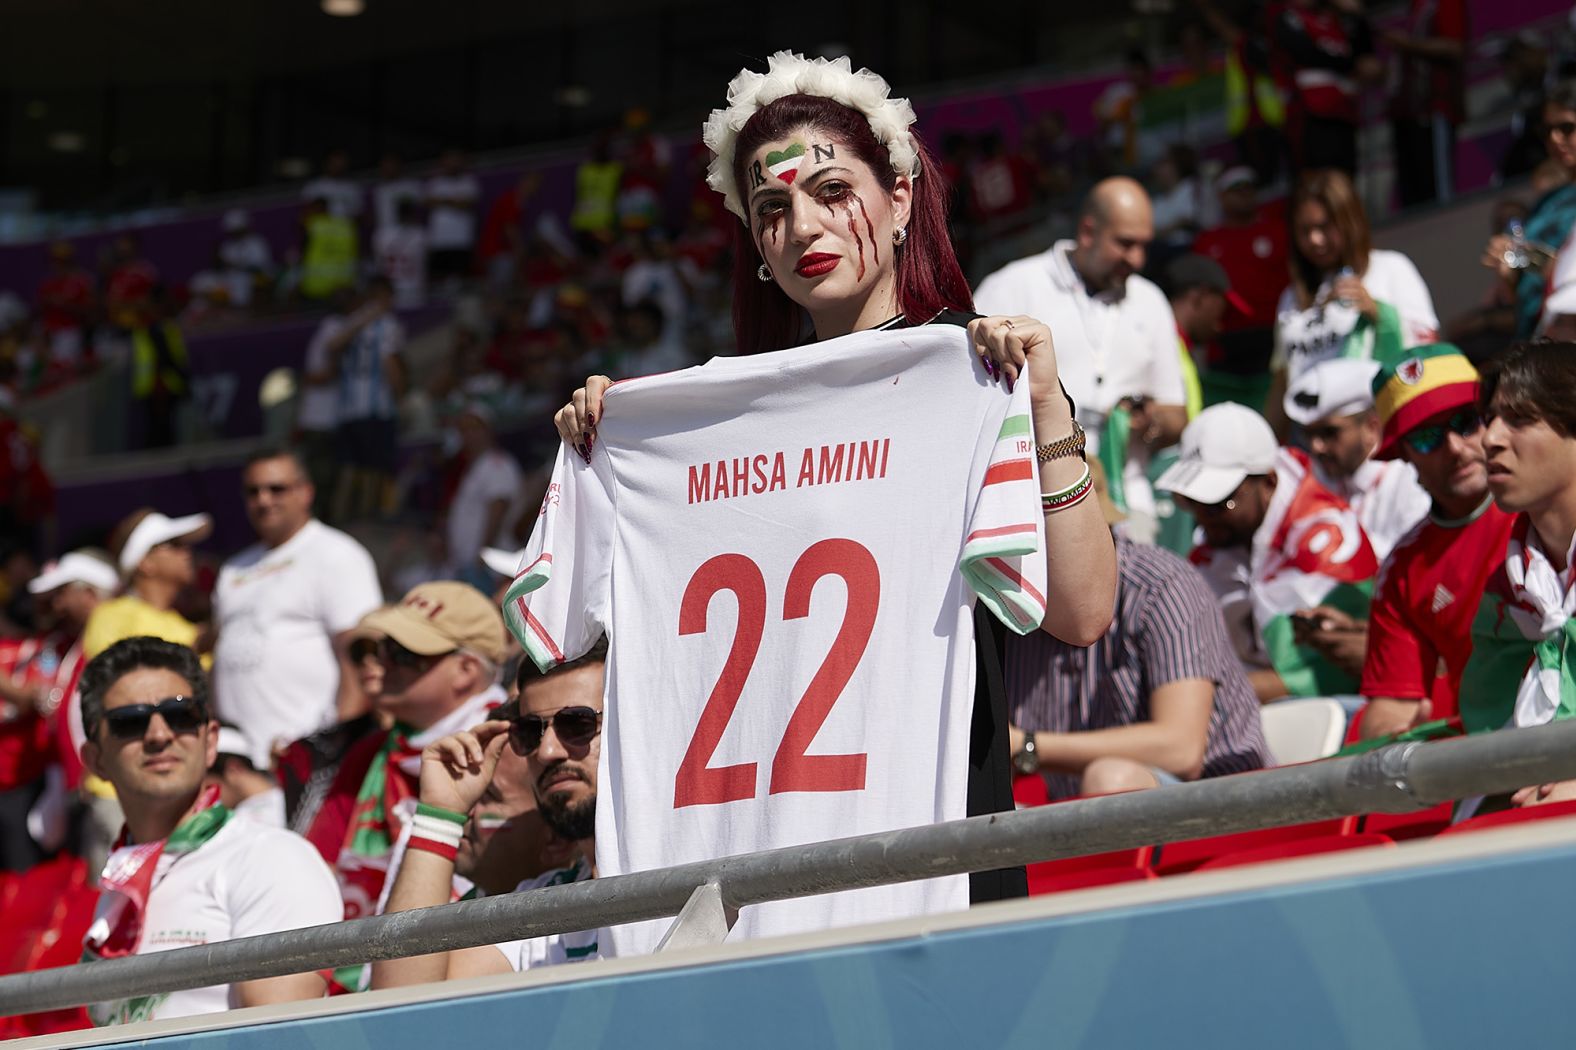 A fan holds a Mahsa Amini jersey as a <a href="index.php?page=&url=https%3A%2F%2Fwww.cnn.com%2Fsport%2Flive-news%2Fworld-cup-11-25-2022%2Fh_13ff0249156256f8afb9d32bd699c870" target="_blank">protest before the Iran-Wales match</a>. Recent protests in Iran were sparked by the death of Amini, a 22-year-old woman who died after being detained by Iran's morality police allegedly for not abiding by the country's conservative dress code.